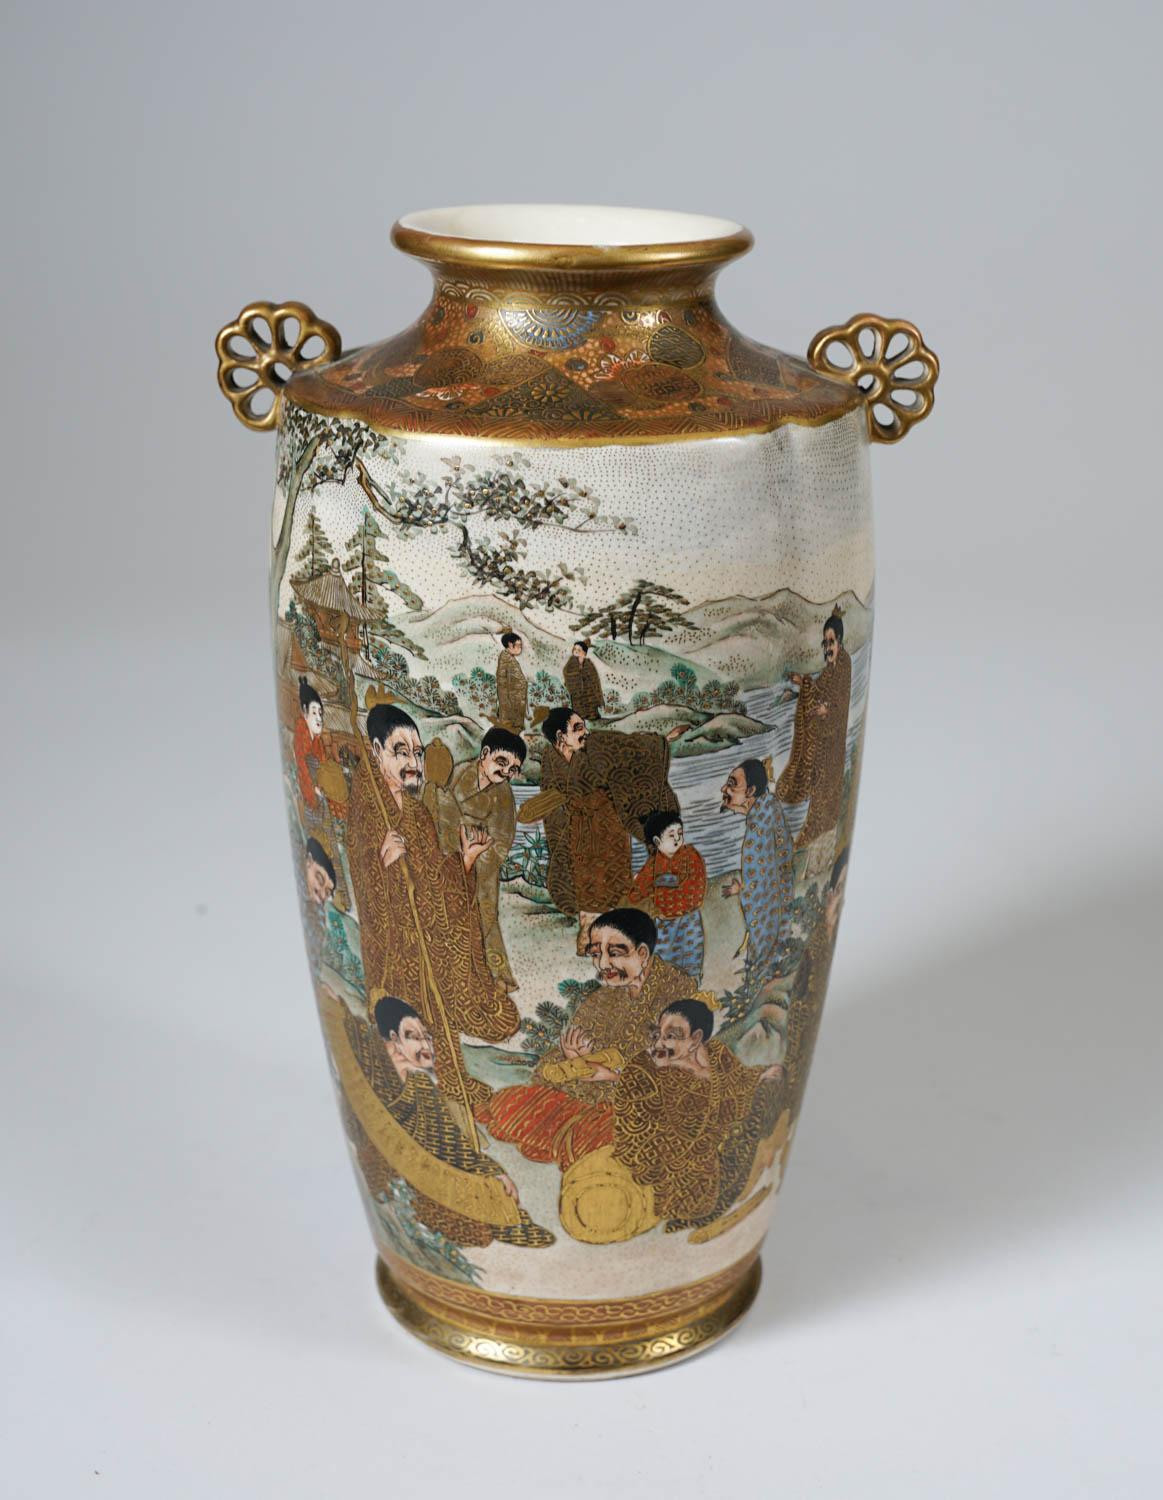 19 Perfect Satsuma Vase Made In China 2024 free download satsuma vase made in china of igavel auctions japanese satsuma vase decorated with immortals within category asian art